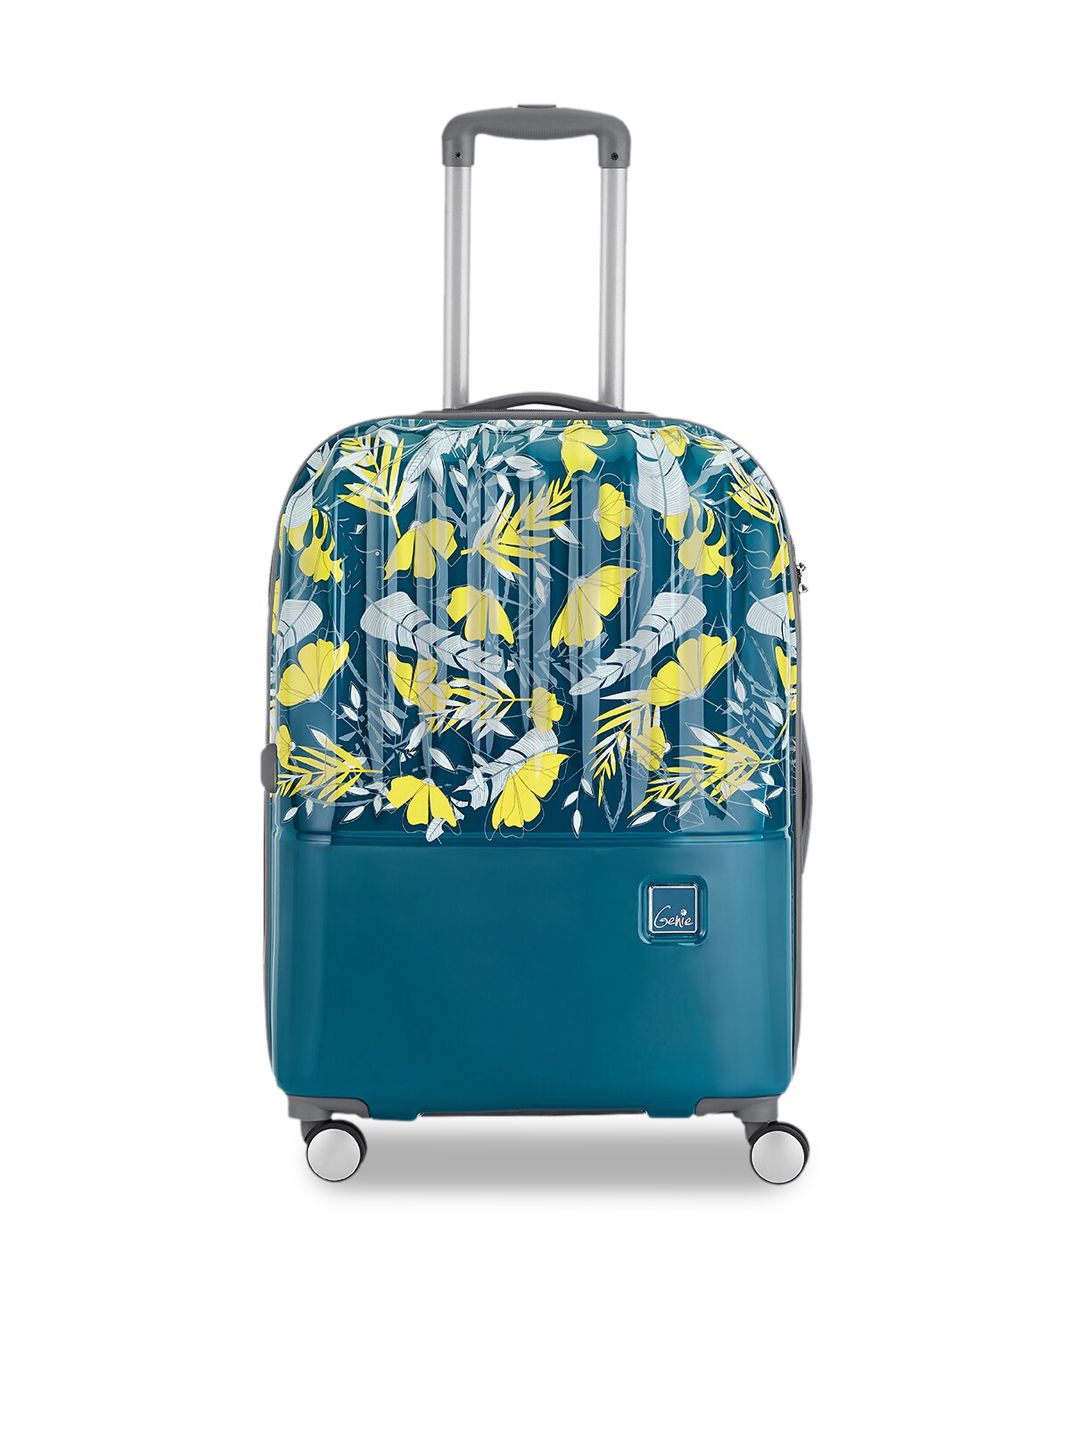 Genie Teal Printed Hard-Sided Small Suitcase Trolley Bag Price in India